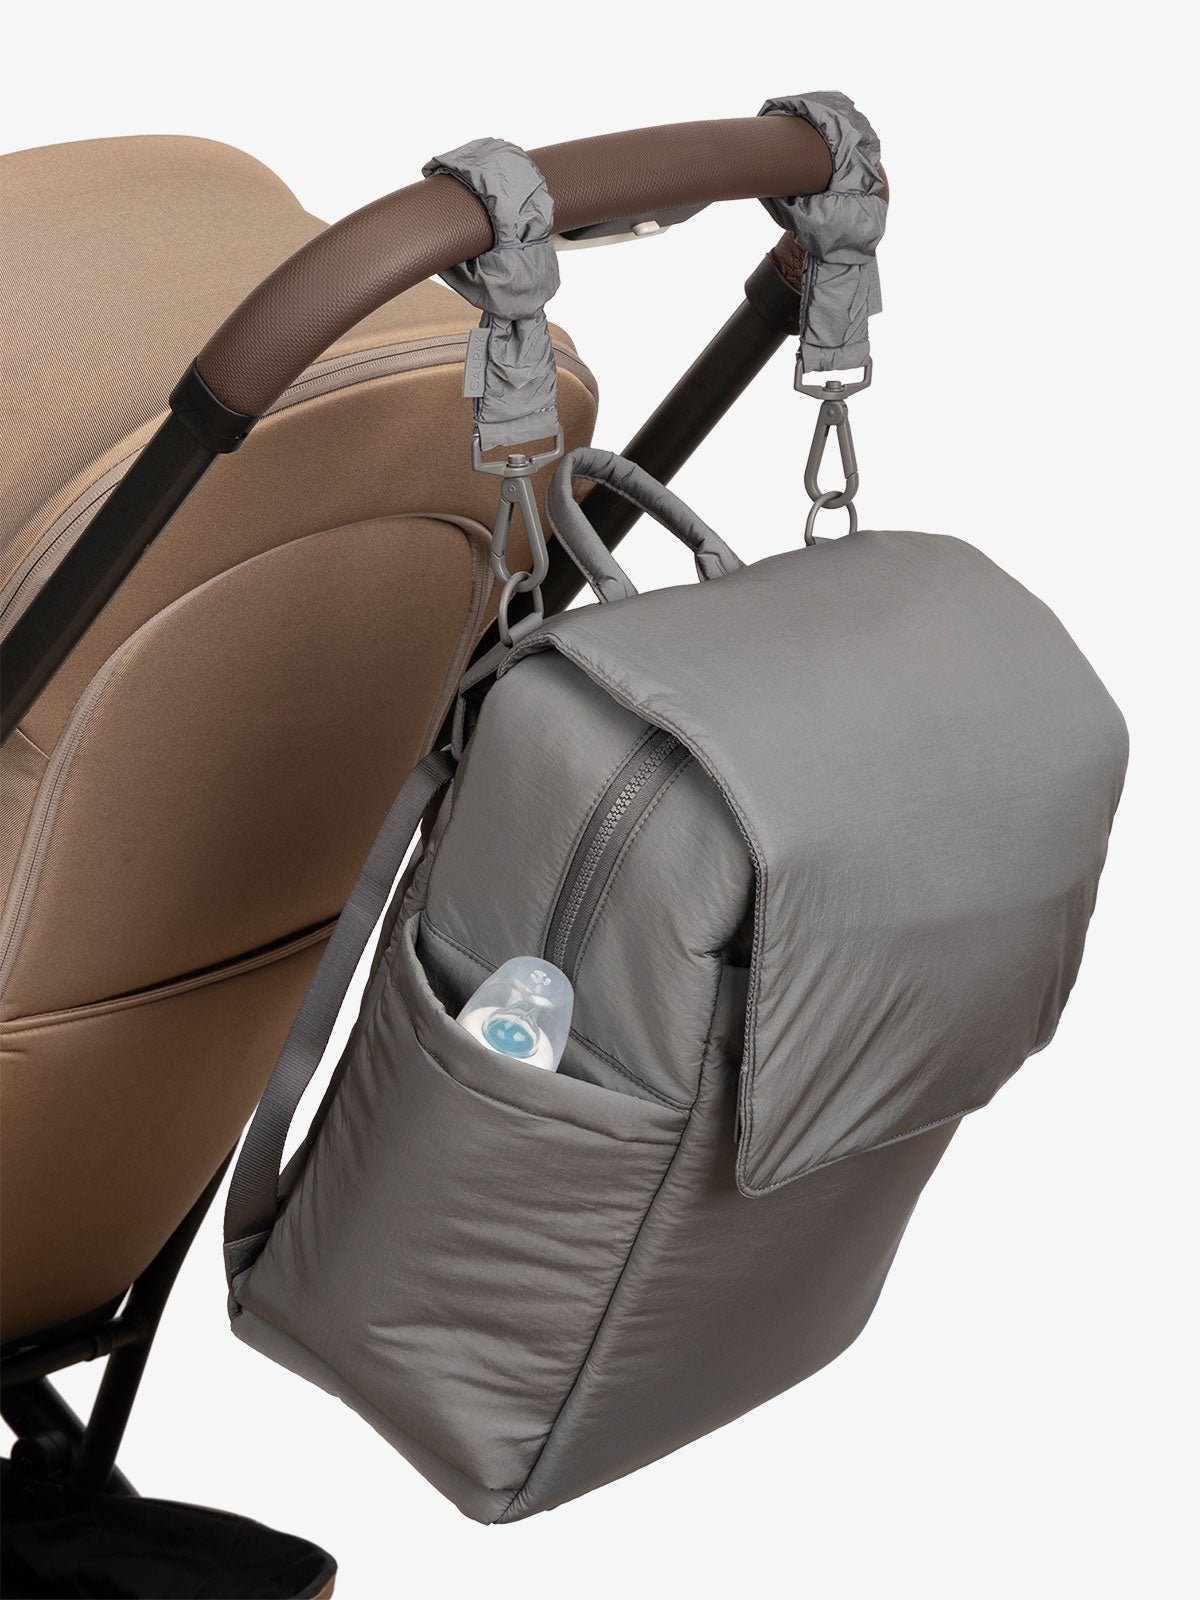 CALPAK Diaper Backpack with Laptop Sleeve attached to stroller by CALPAK Stroller Straps in slate